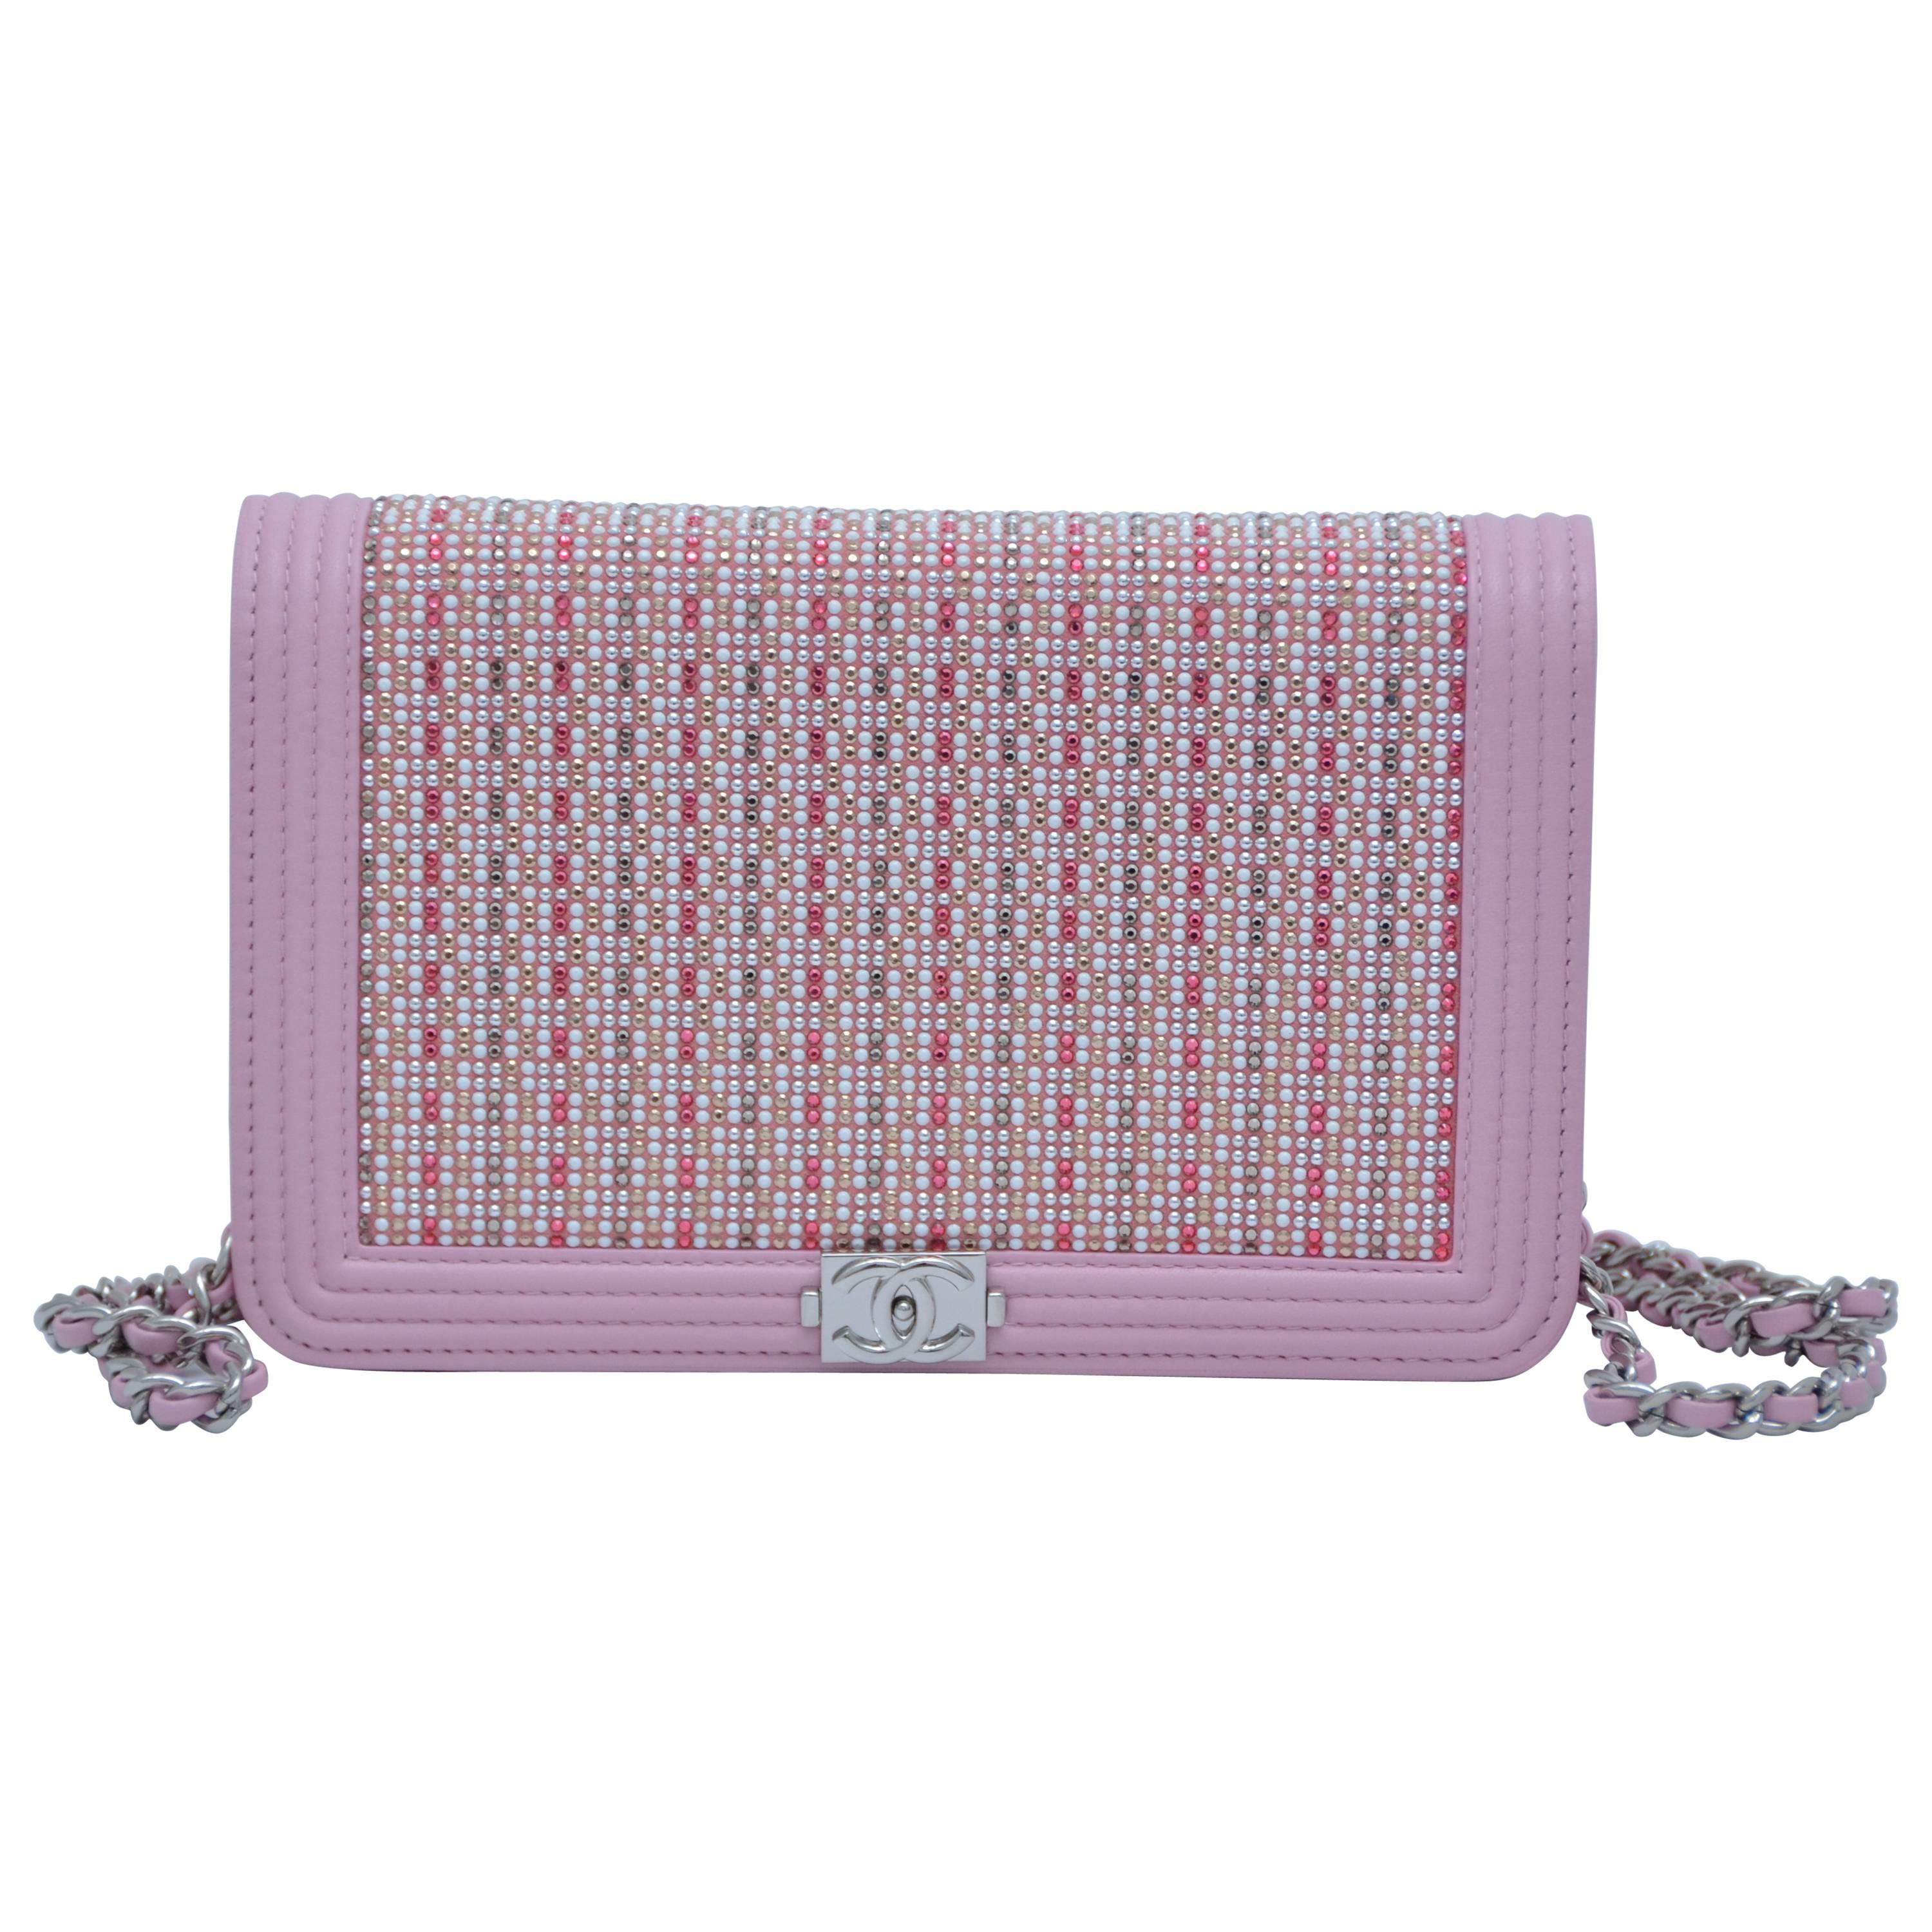 Chanel Baby Pink Wallet On Chain With Sparkling Crystal Embellishments 